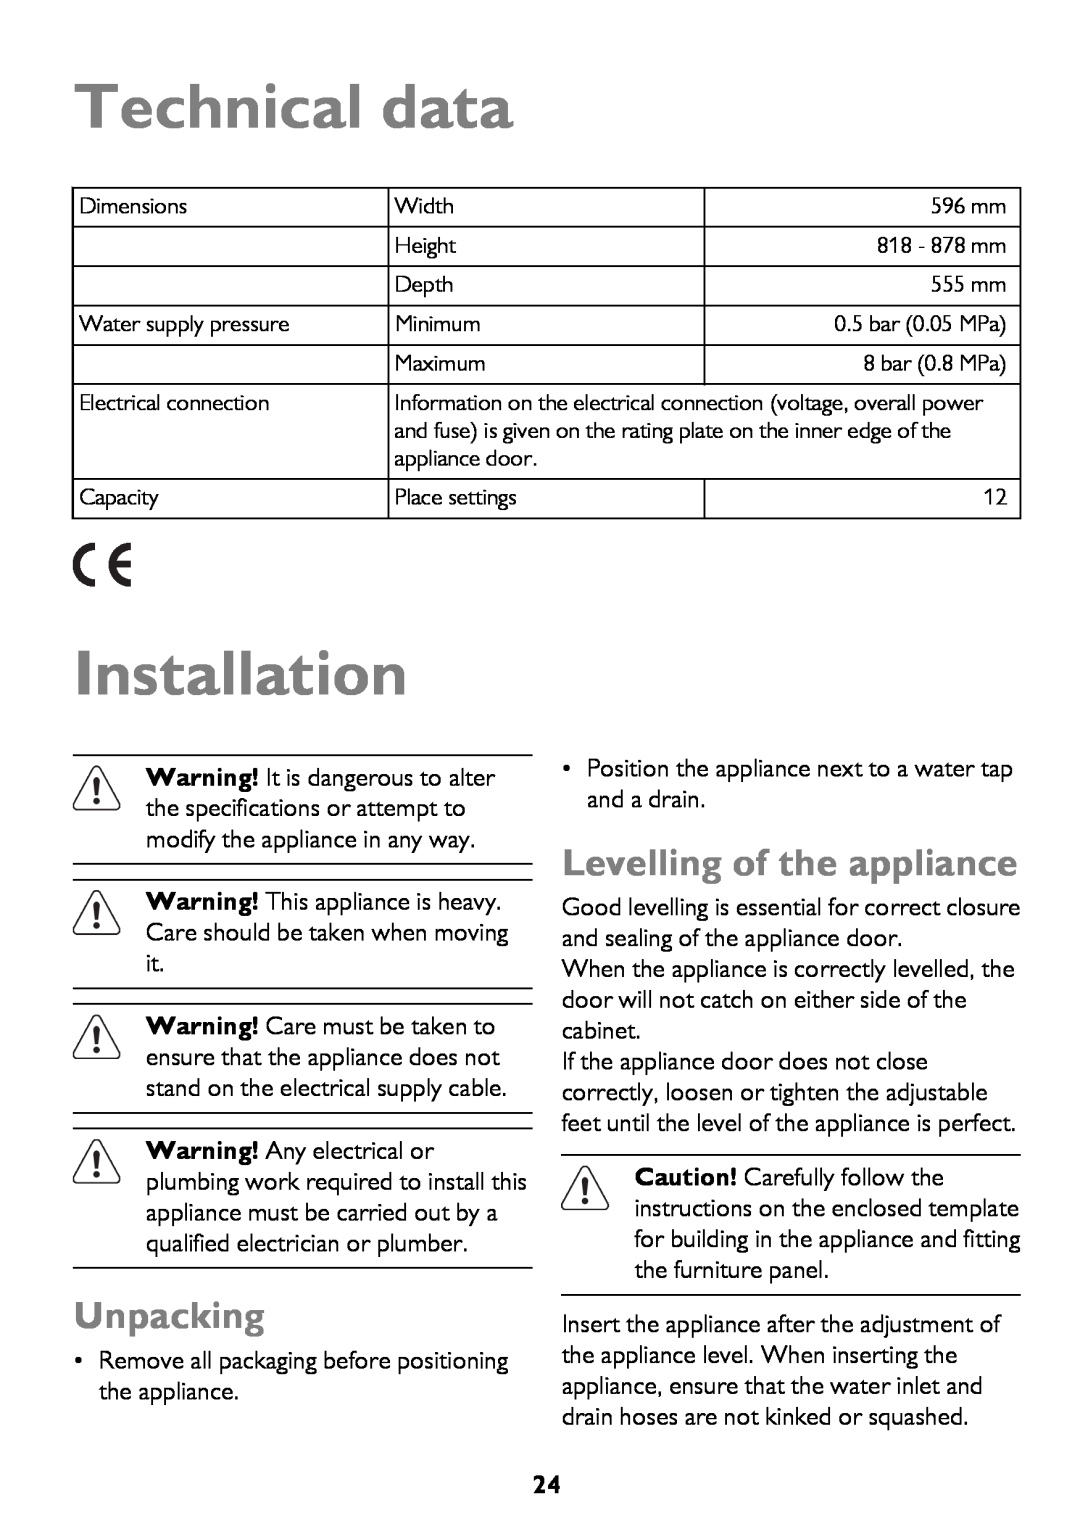 John Lewis JLBIDW 1201 instruction manual Technical data, Installation, Levelling of the appliance, Unpacking 